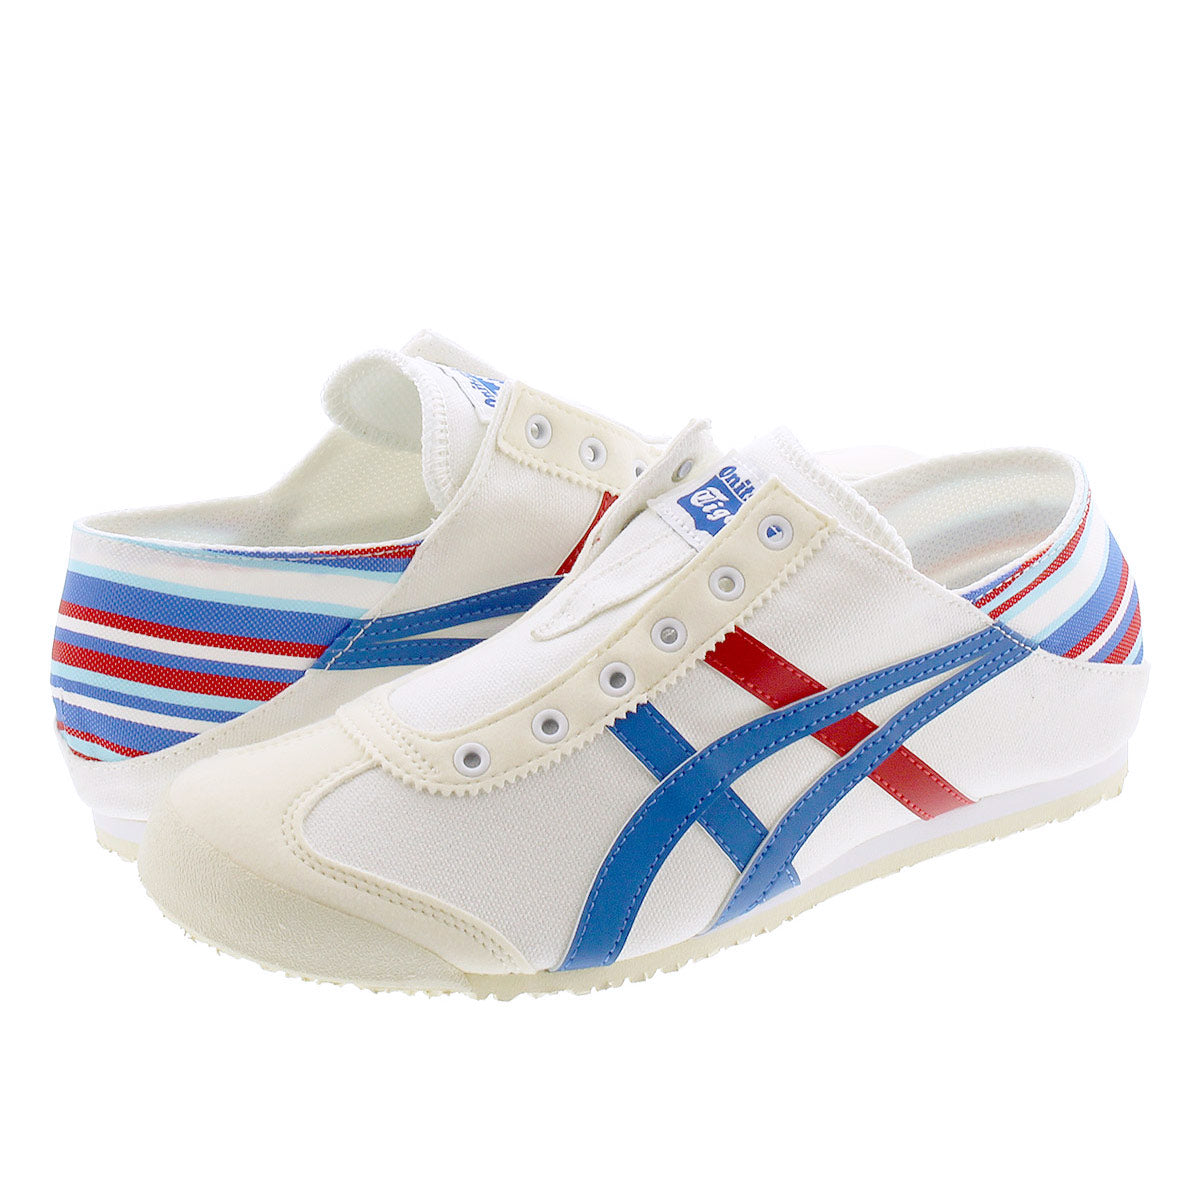 🎌Japan🎌 Direct delivery of Onitsuka TIGER casual shoes📢Order